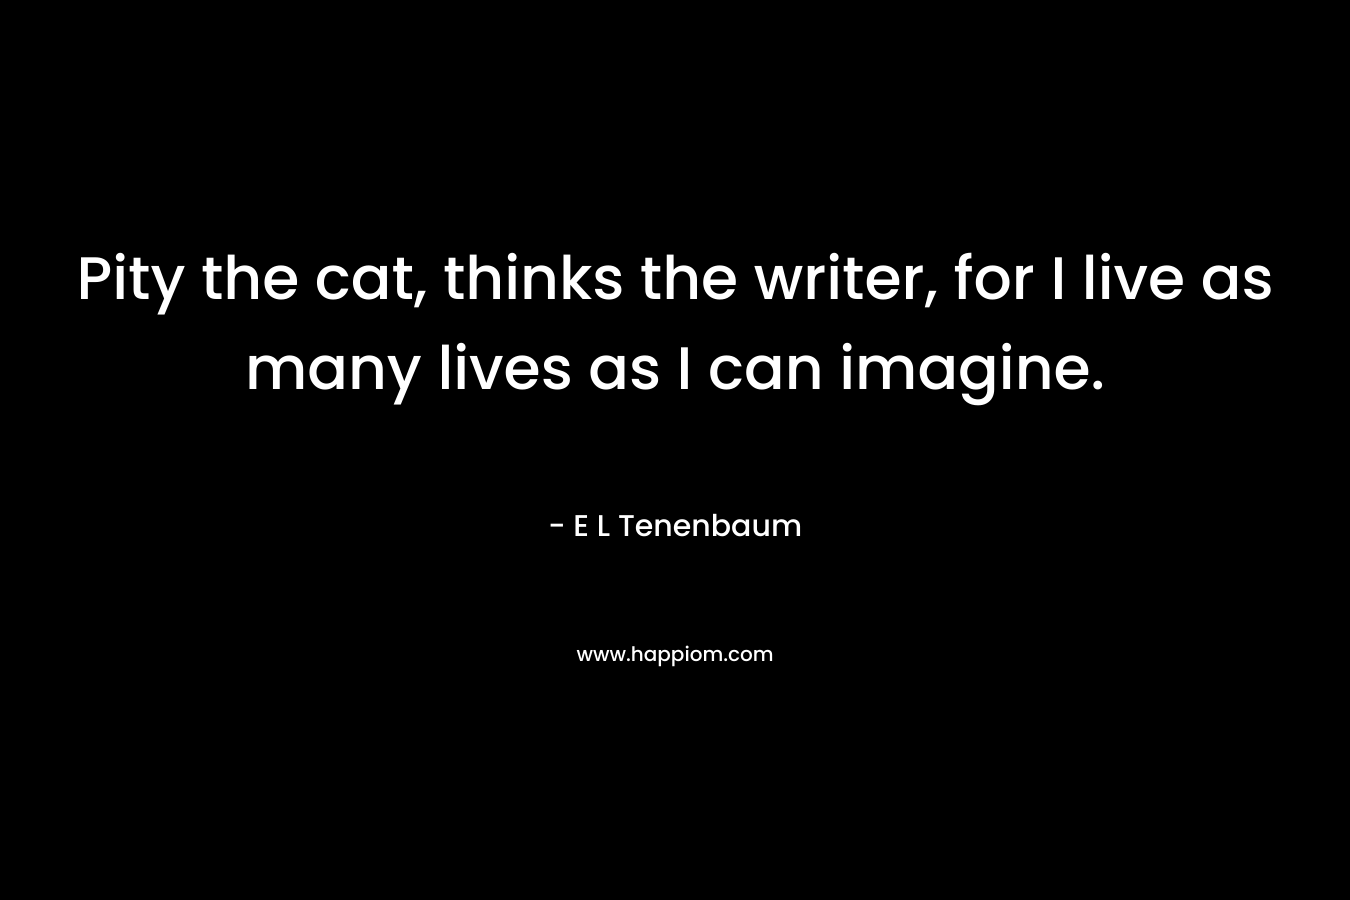 Pity the cat, thinks the writer, for I live as many lives as I can imagine. – E L Tenenbaum